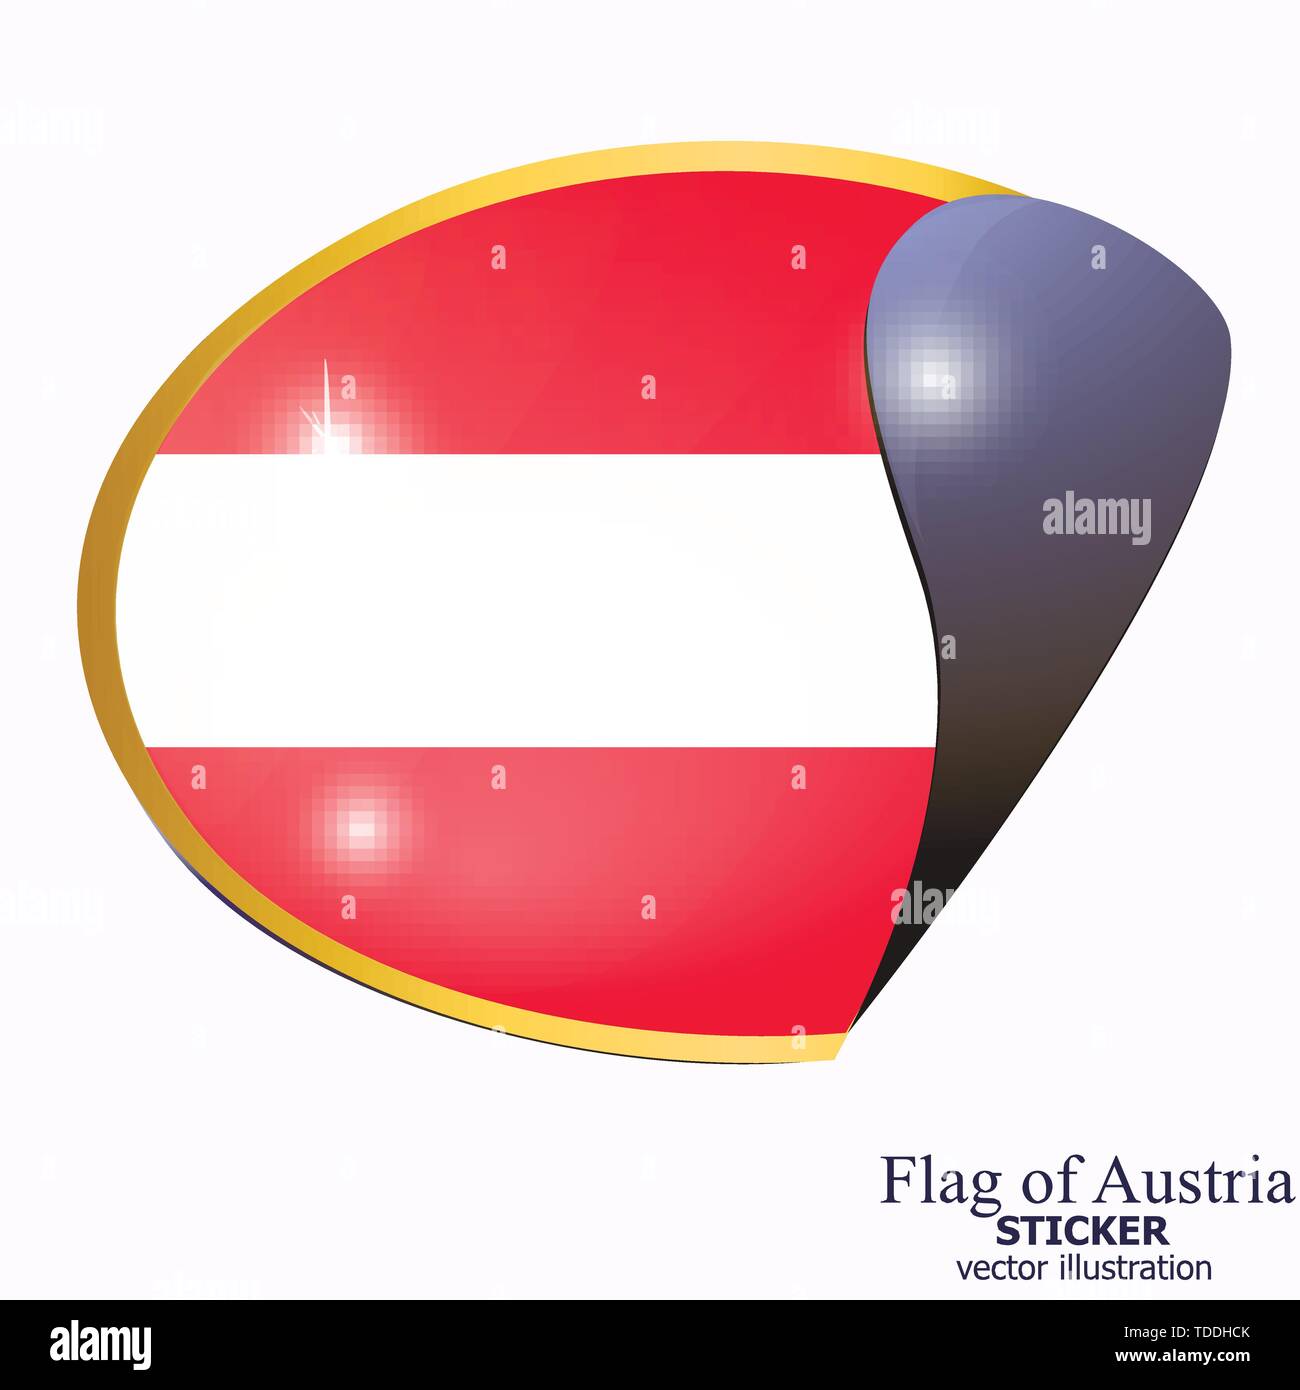 Bright sticker with flag of Austria. Happy Austria day background. Bright illustration with flag and white background. Stock Vector